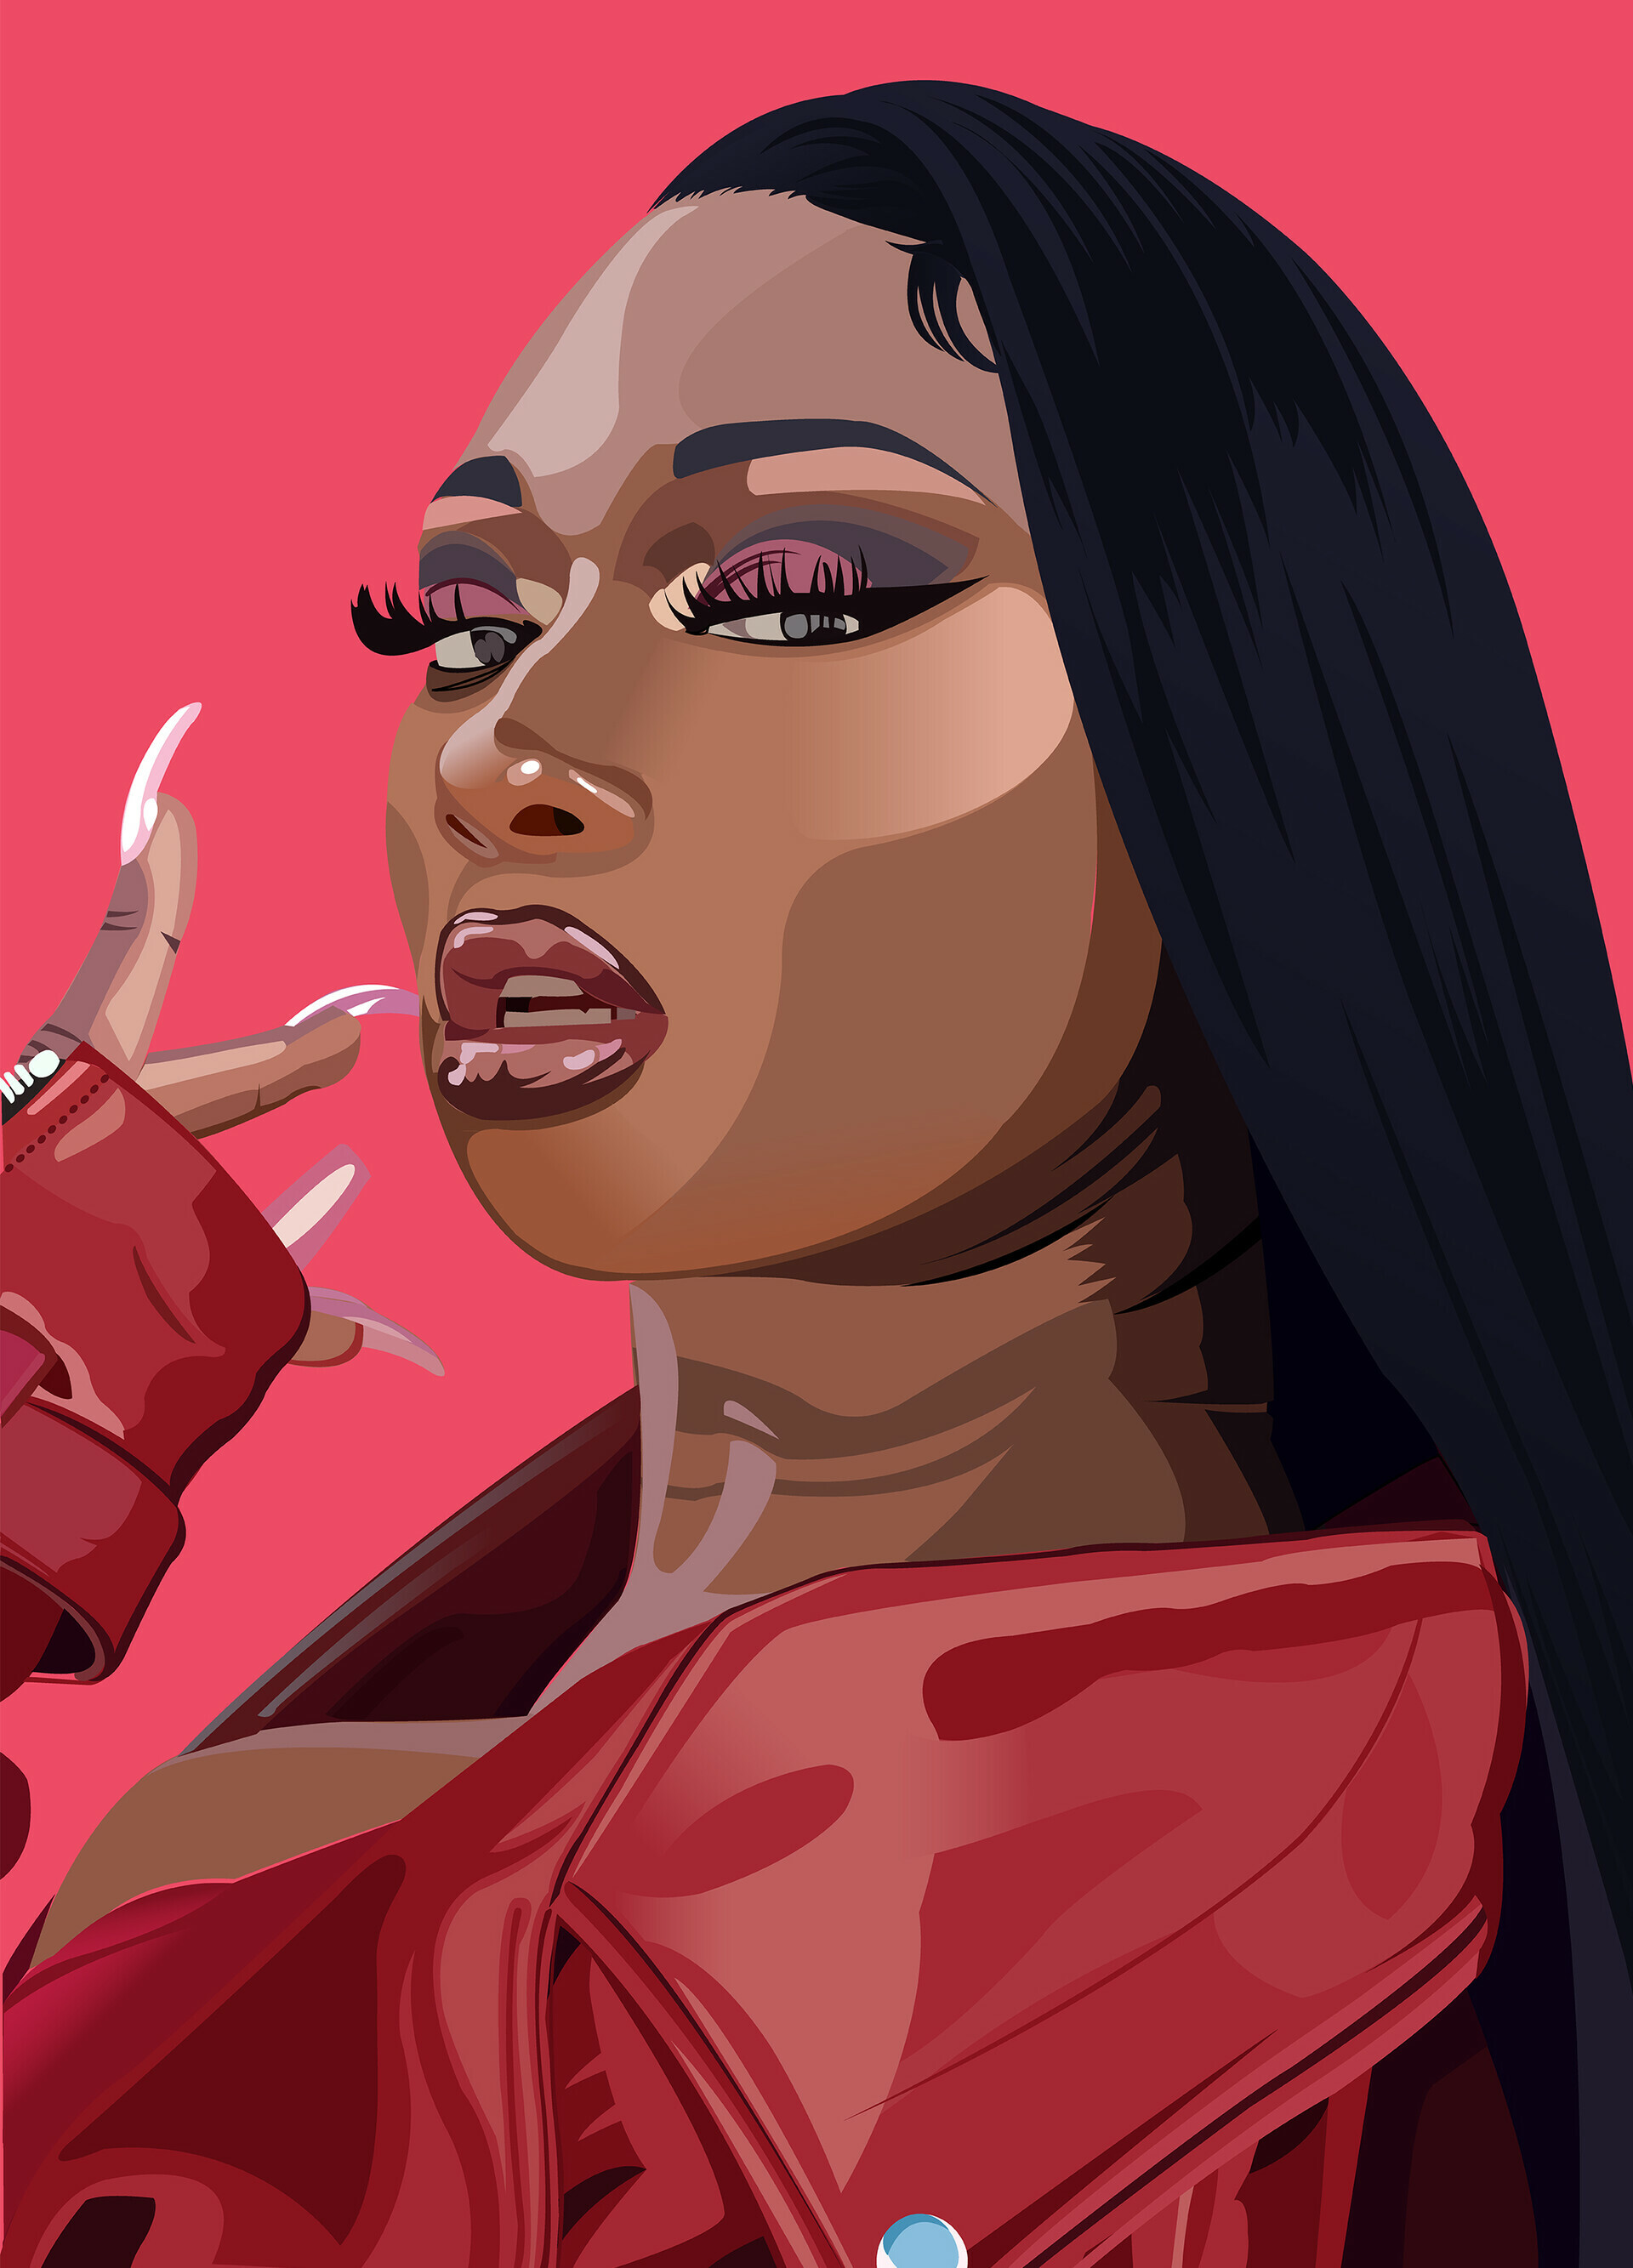 Megan Thee Stallion: The debut commercial mixtape, Fever, was released on May 17, 2019. 1920x2670 HD Background.